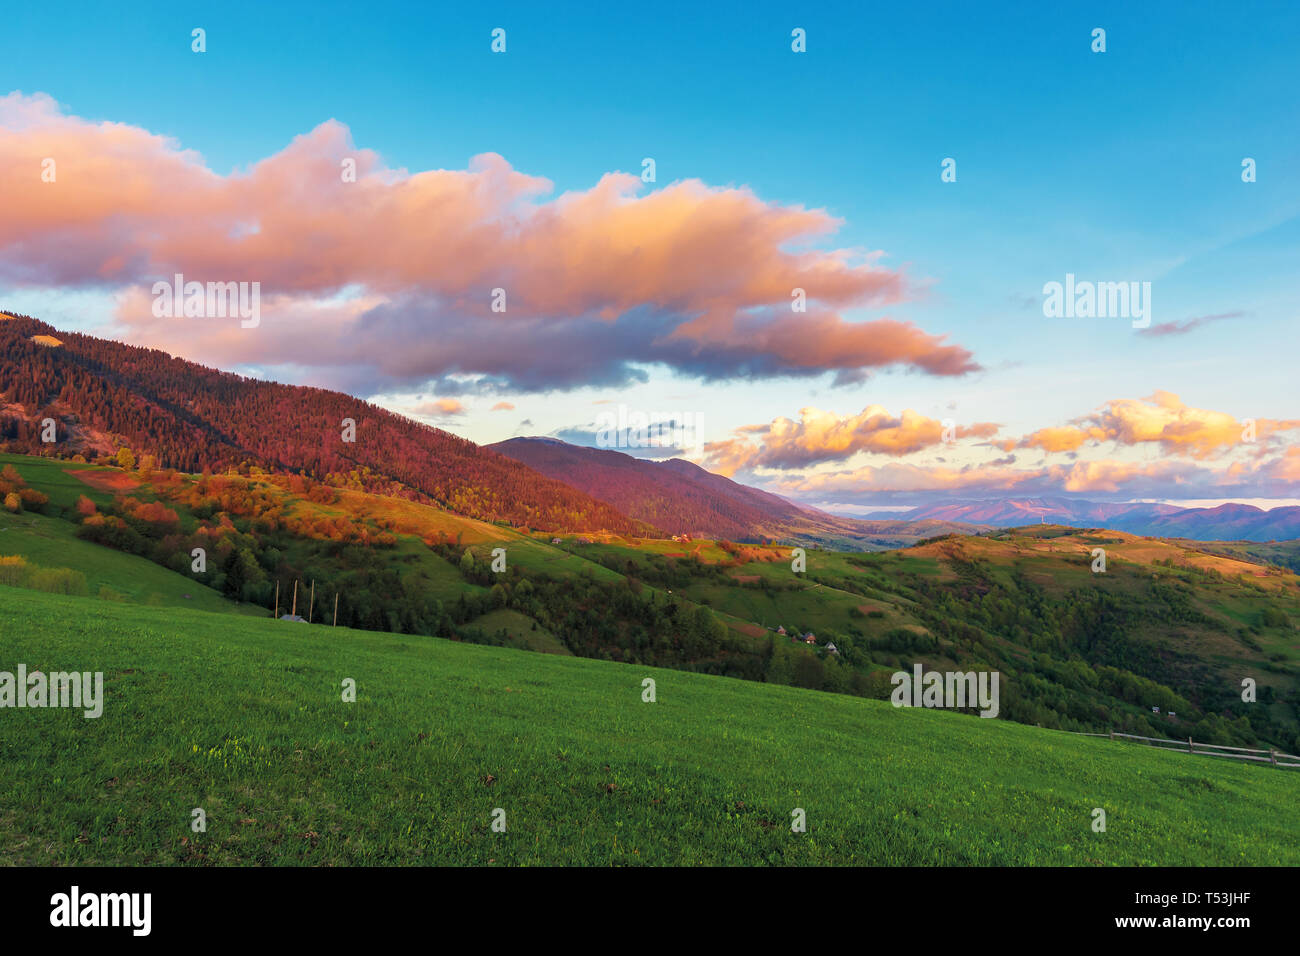 beautiful rural landscape in mountains at dawn. agricultural fields on hills. ridge in the distance. wonderful european countryside in springtime. gor Stock Photo